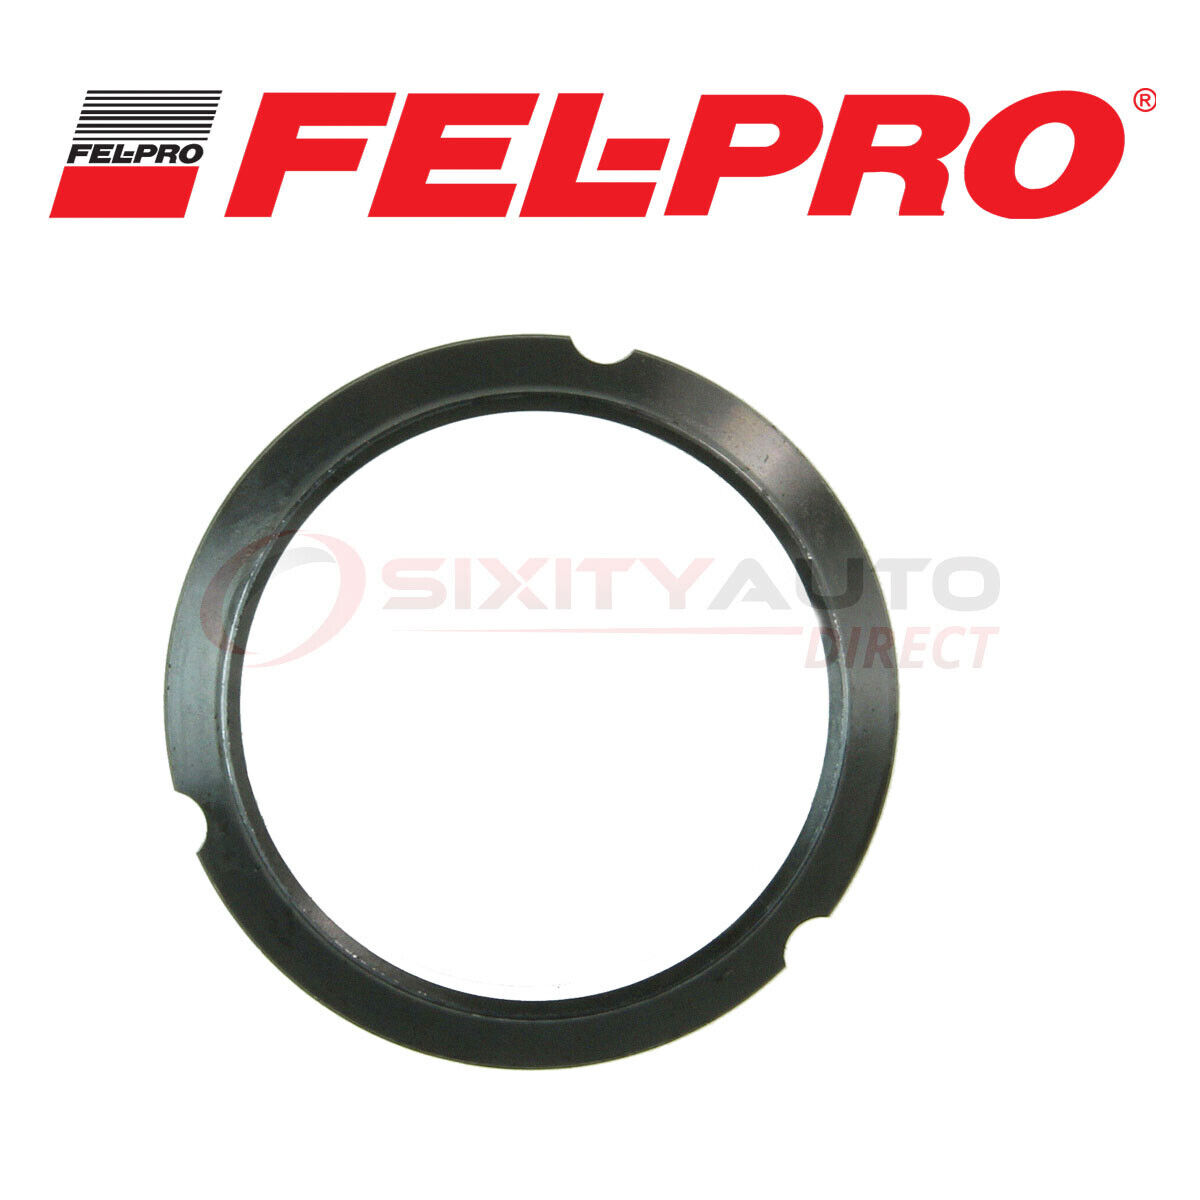 Fel Pro Exhaust Pipe Flange Gasket for 2002-2004 Mercedes-Benz C32 AMG 3.2L wh